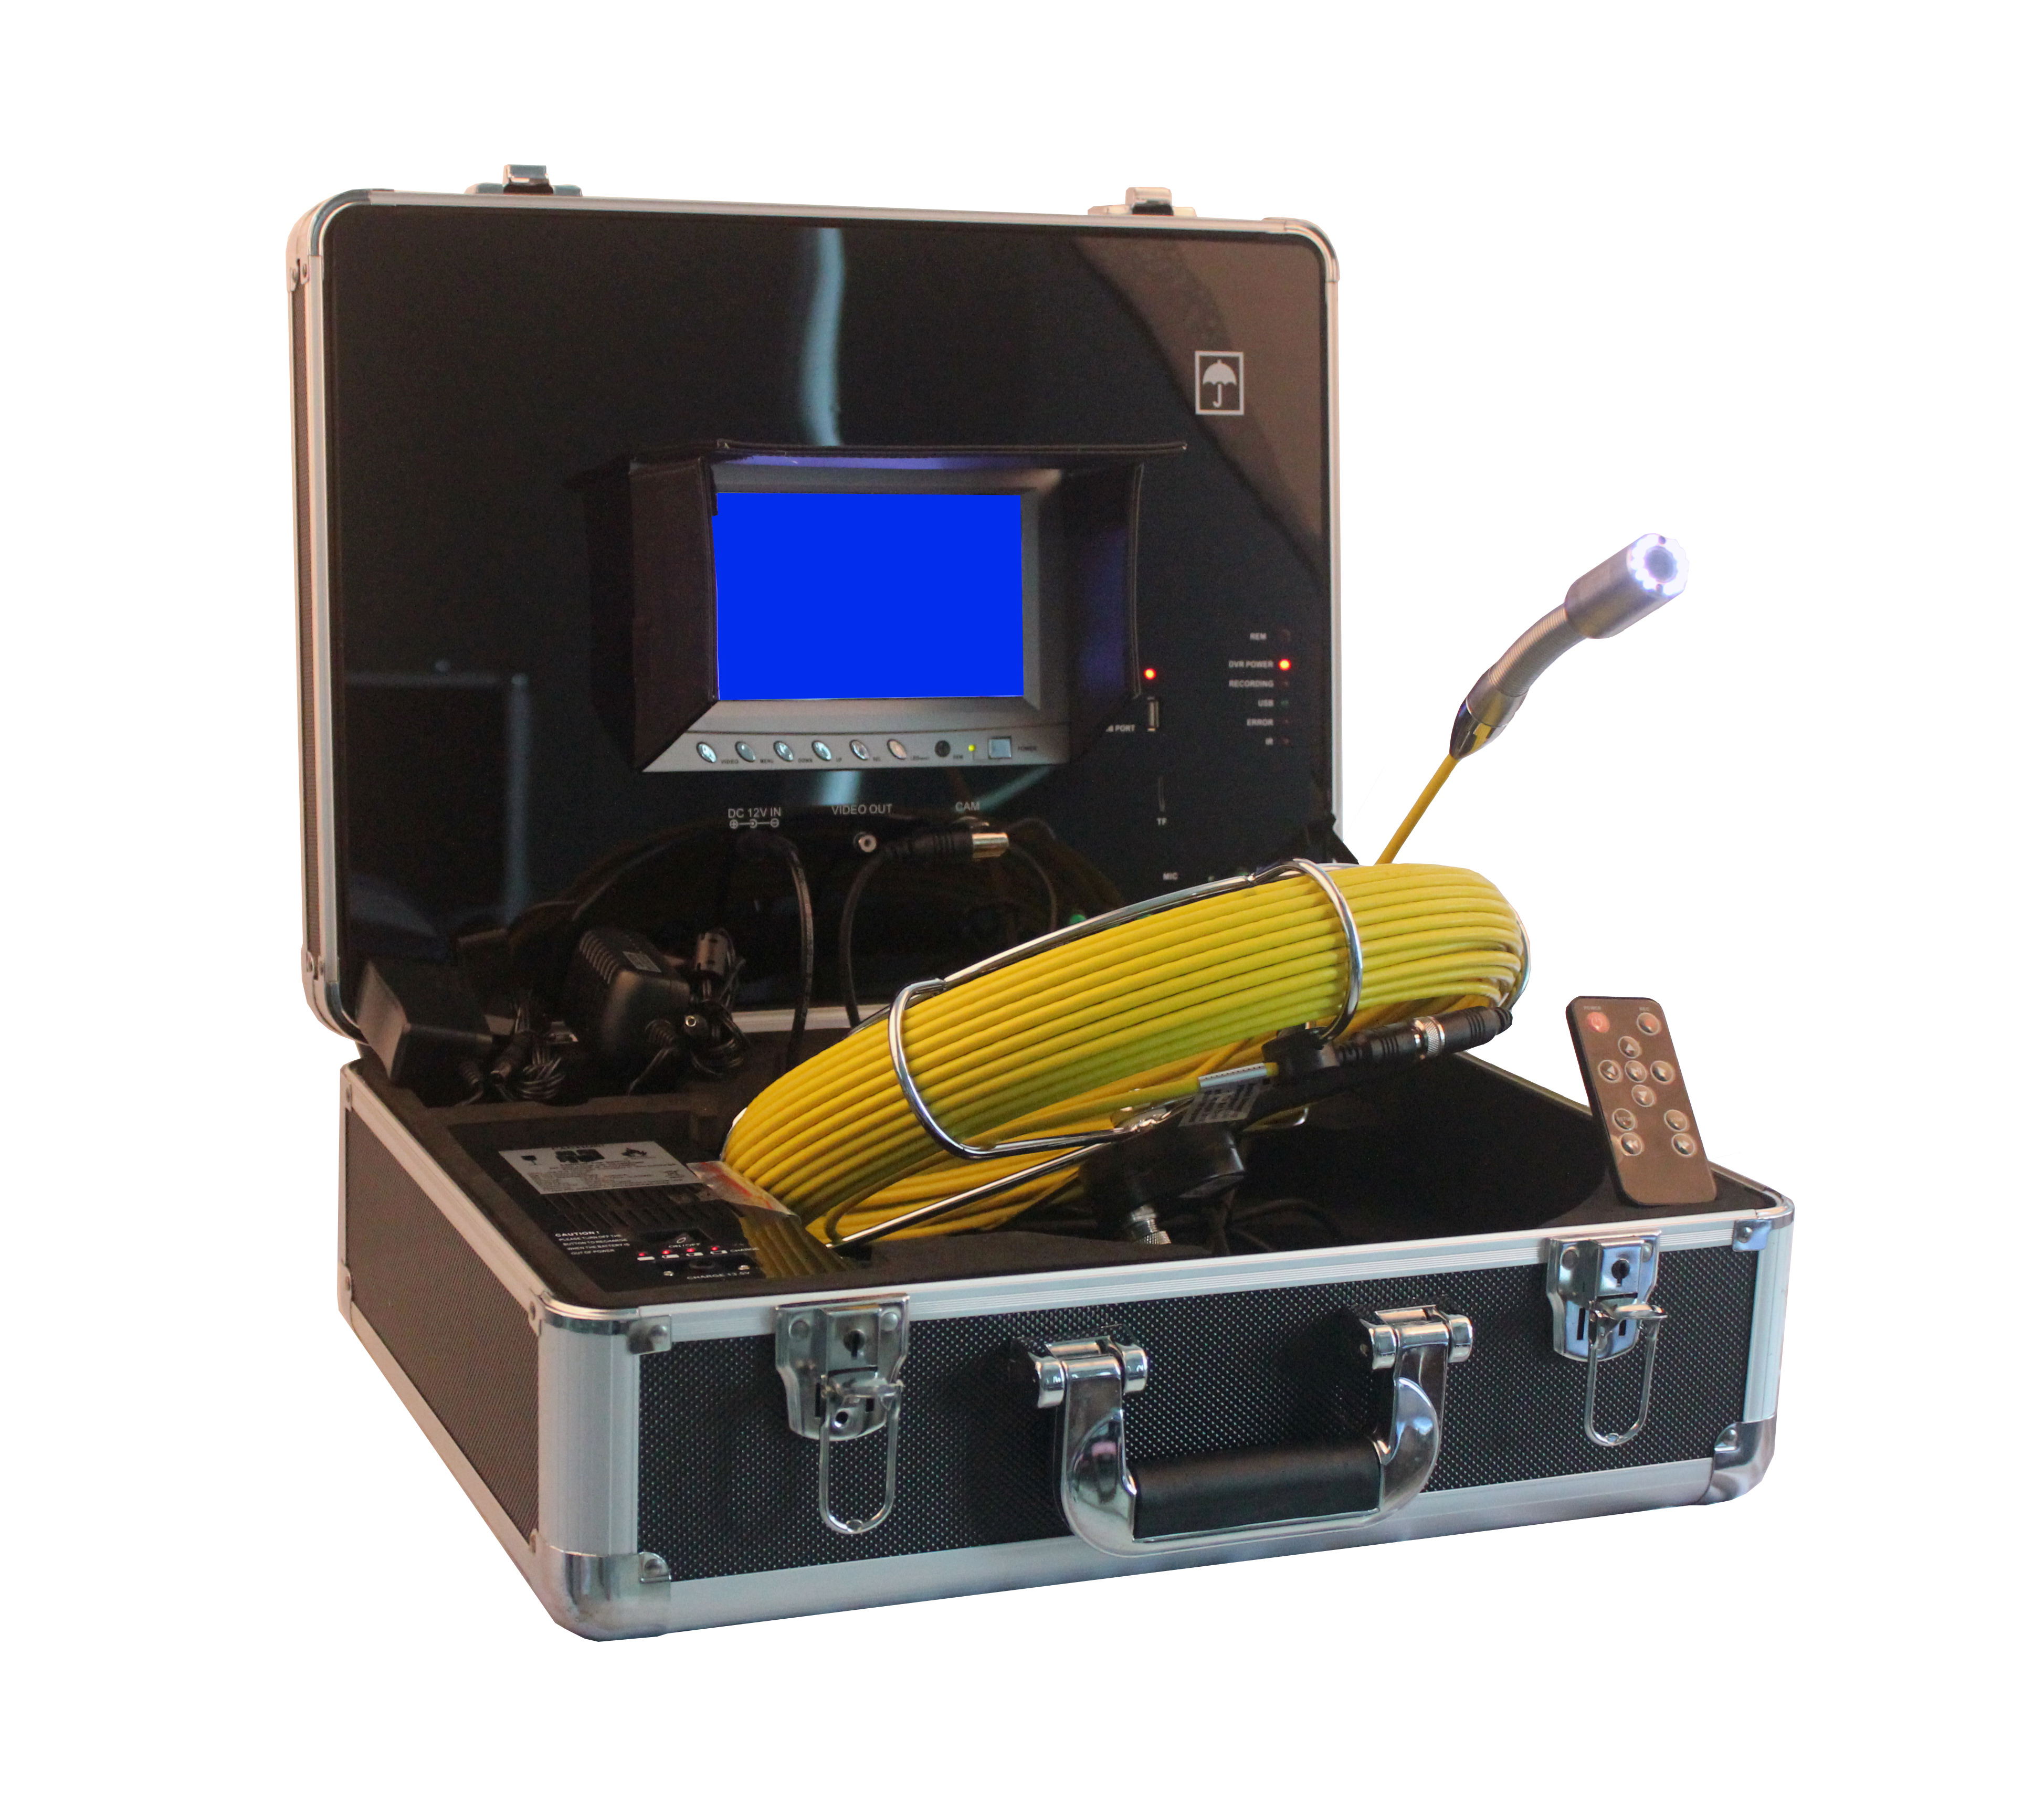 Pipe Drain Sewer Video Inspection Camera System with 7